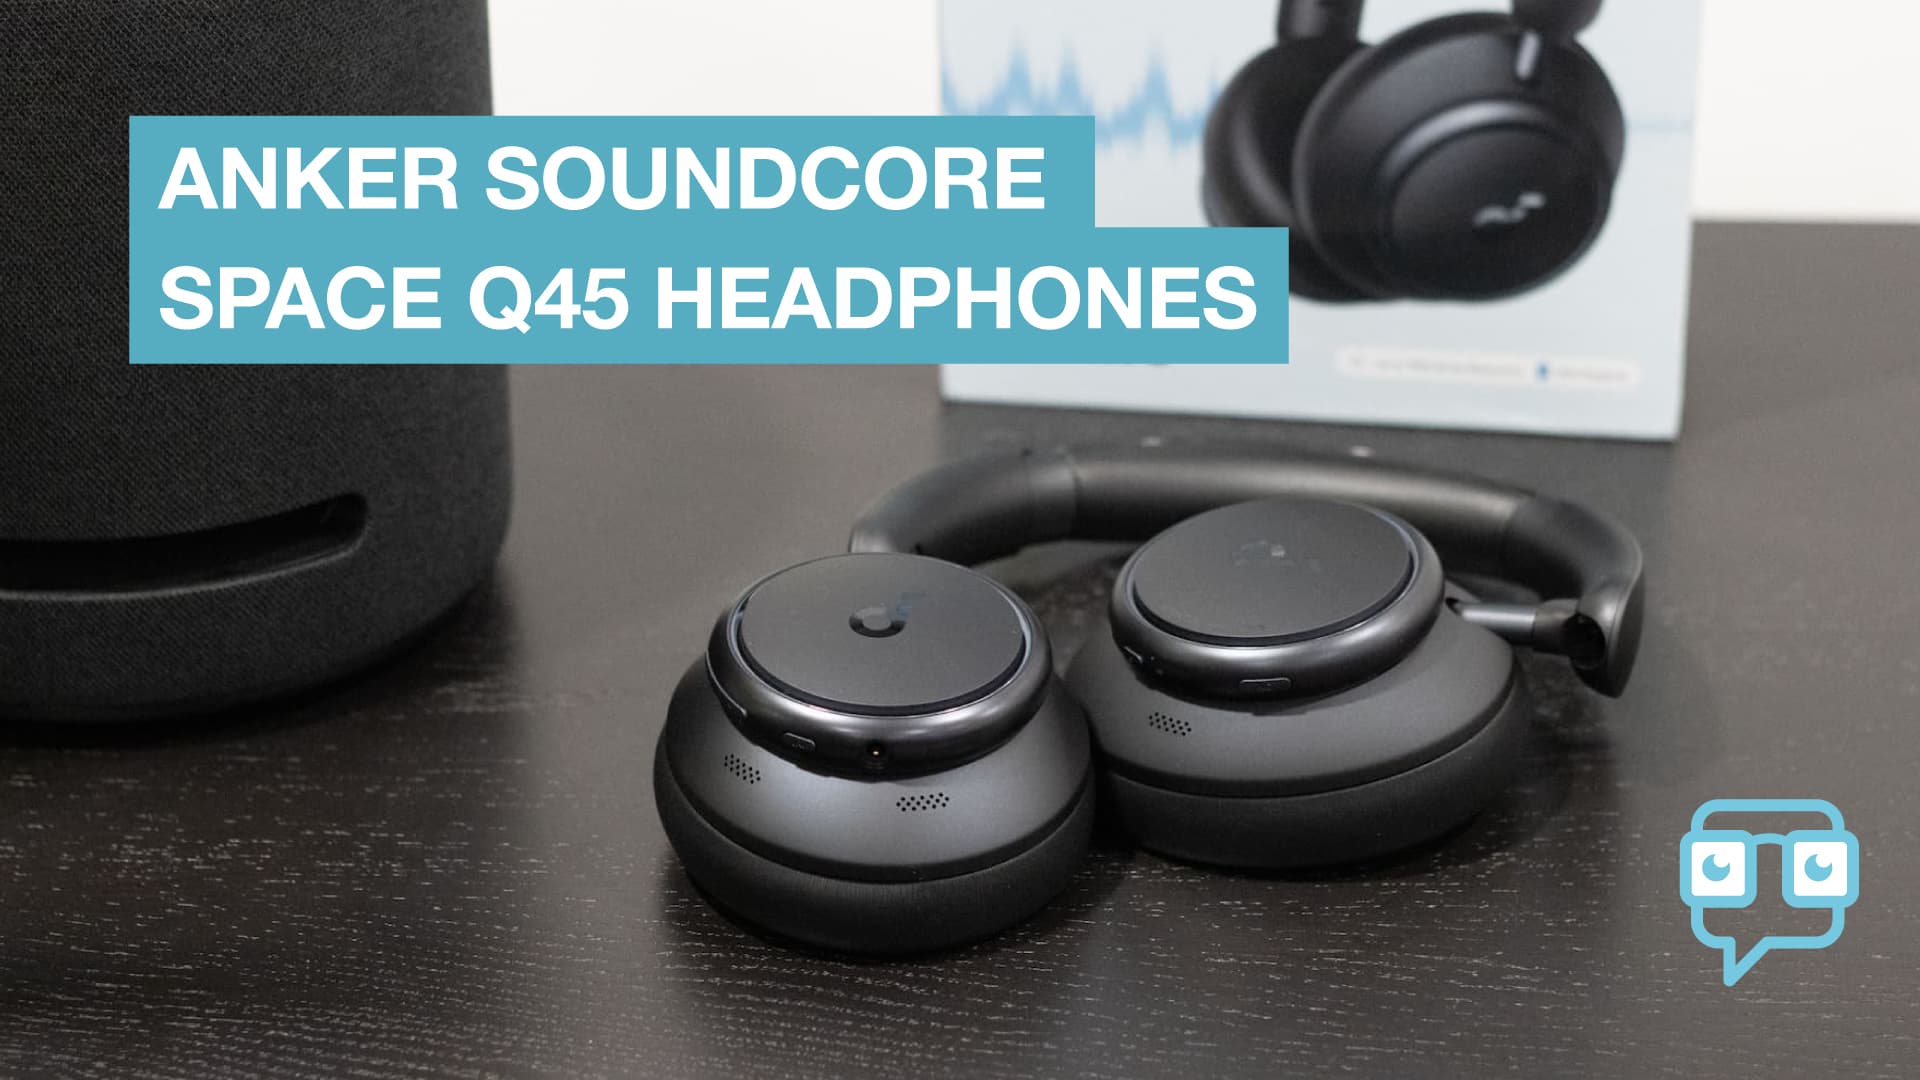 Anker Soundcore Space Q45 Review: Excellent Quality for Reasonable Price